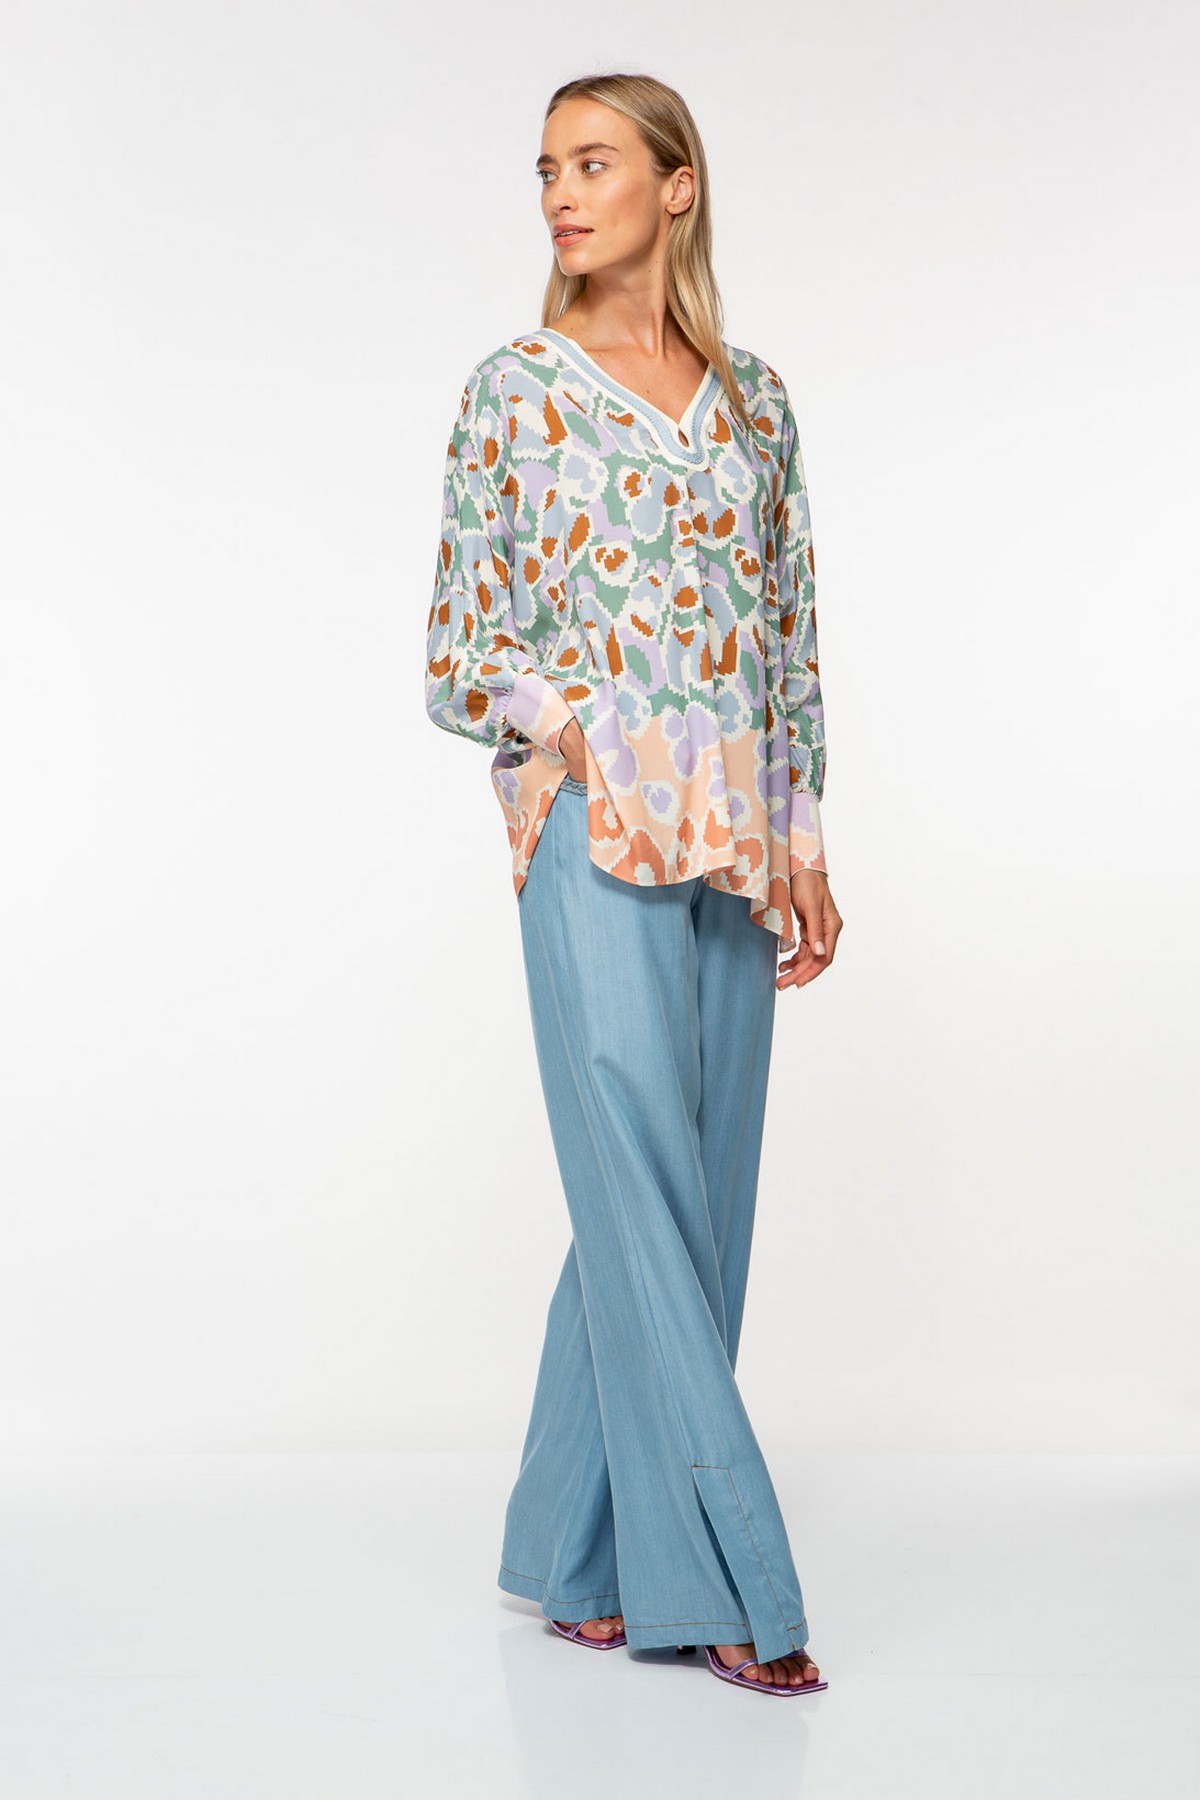 Ivi Collection - Pixel Leo tunic - Bloes V print pastel